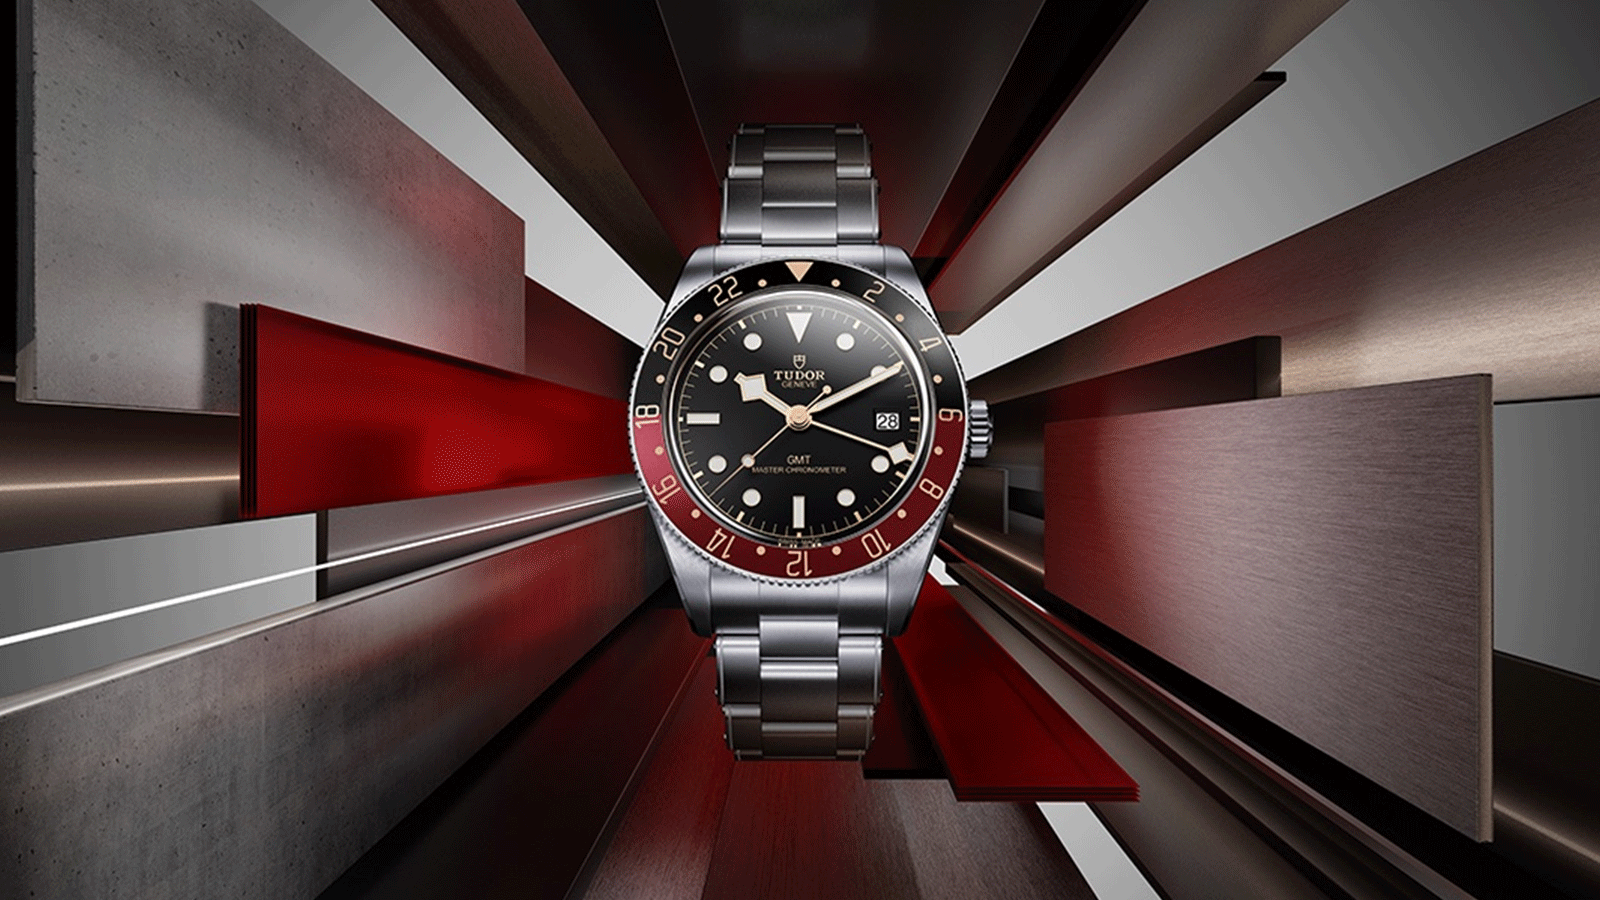 TUDOR presents the all-new Black Bay 58 GMT, fitted with TUDOR's new mid-size GMT Manufacture Calibre displaying hour, minute, seconds and GMT functions with warm hues of burgundy, black, and gilt on the dial and bezel.